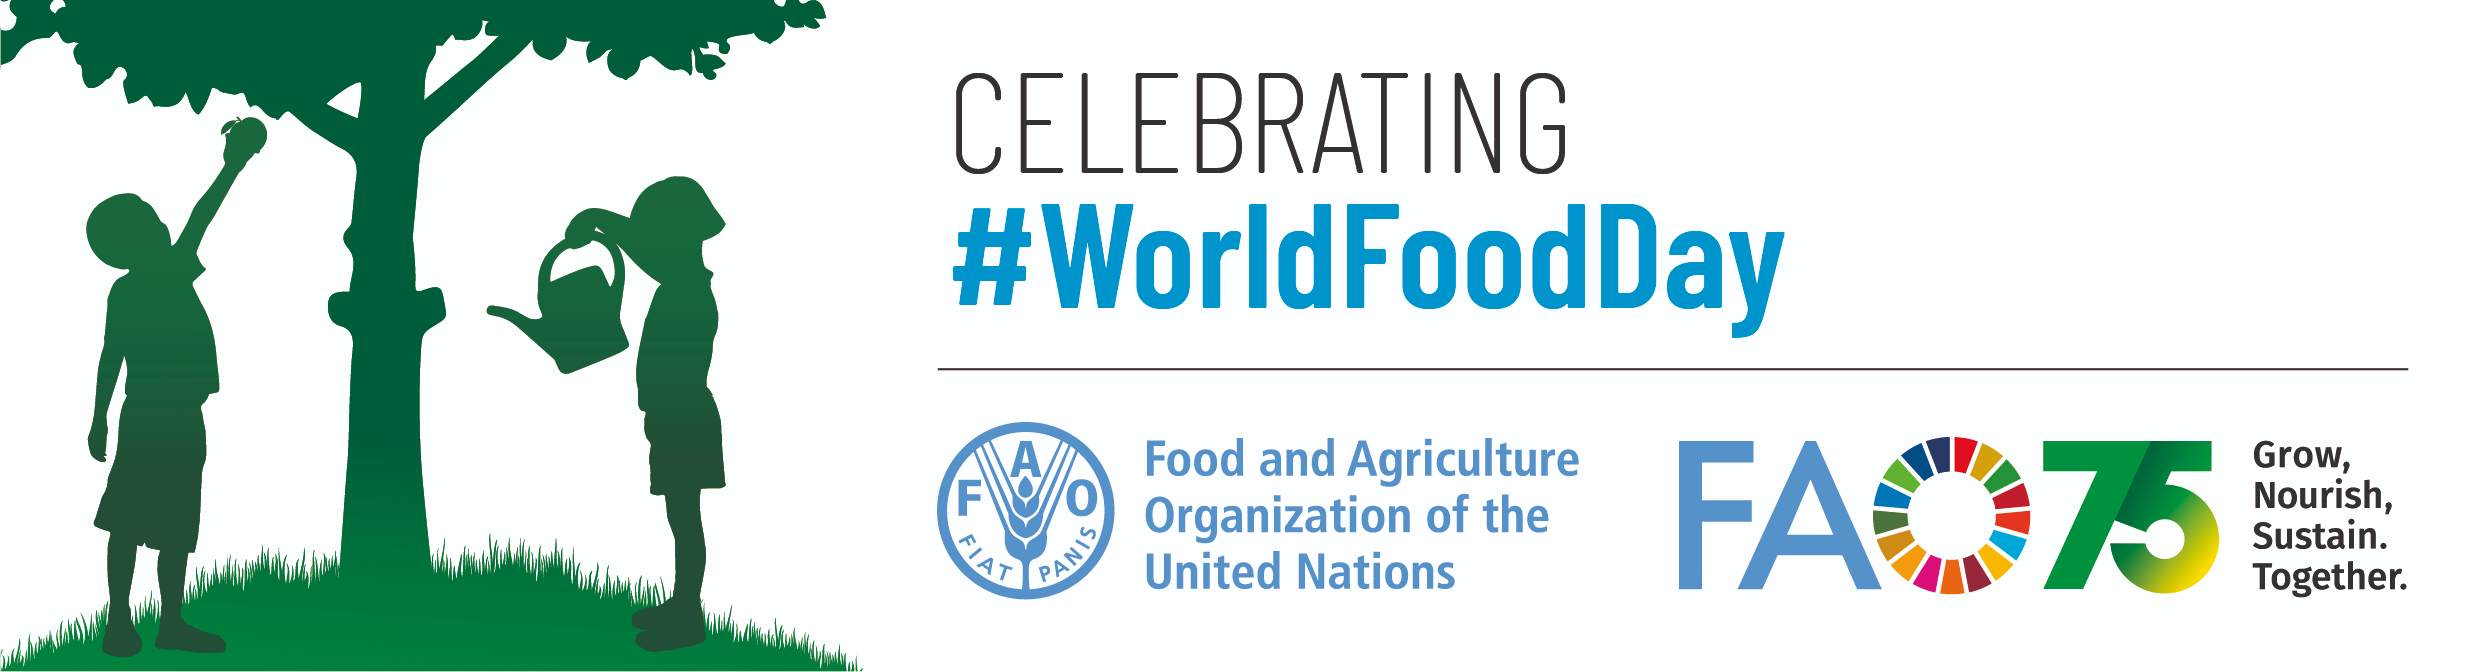 The World Food Day events